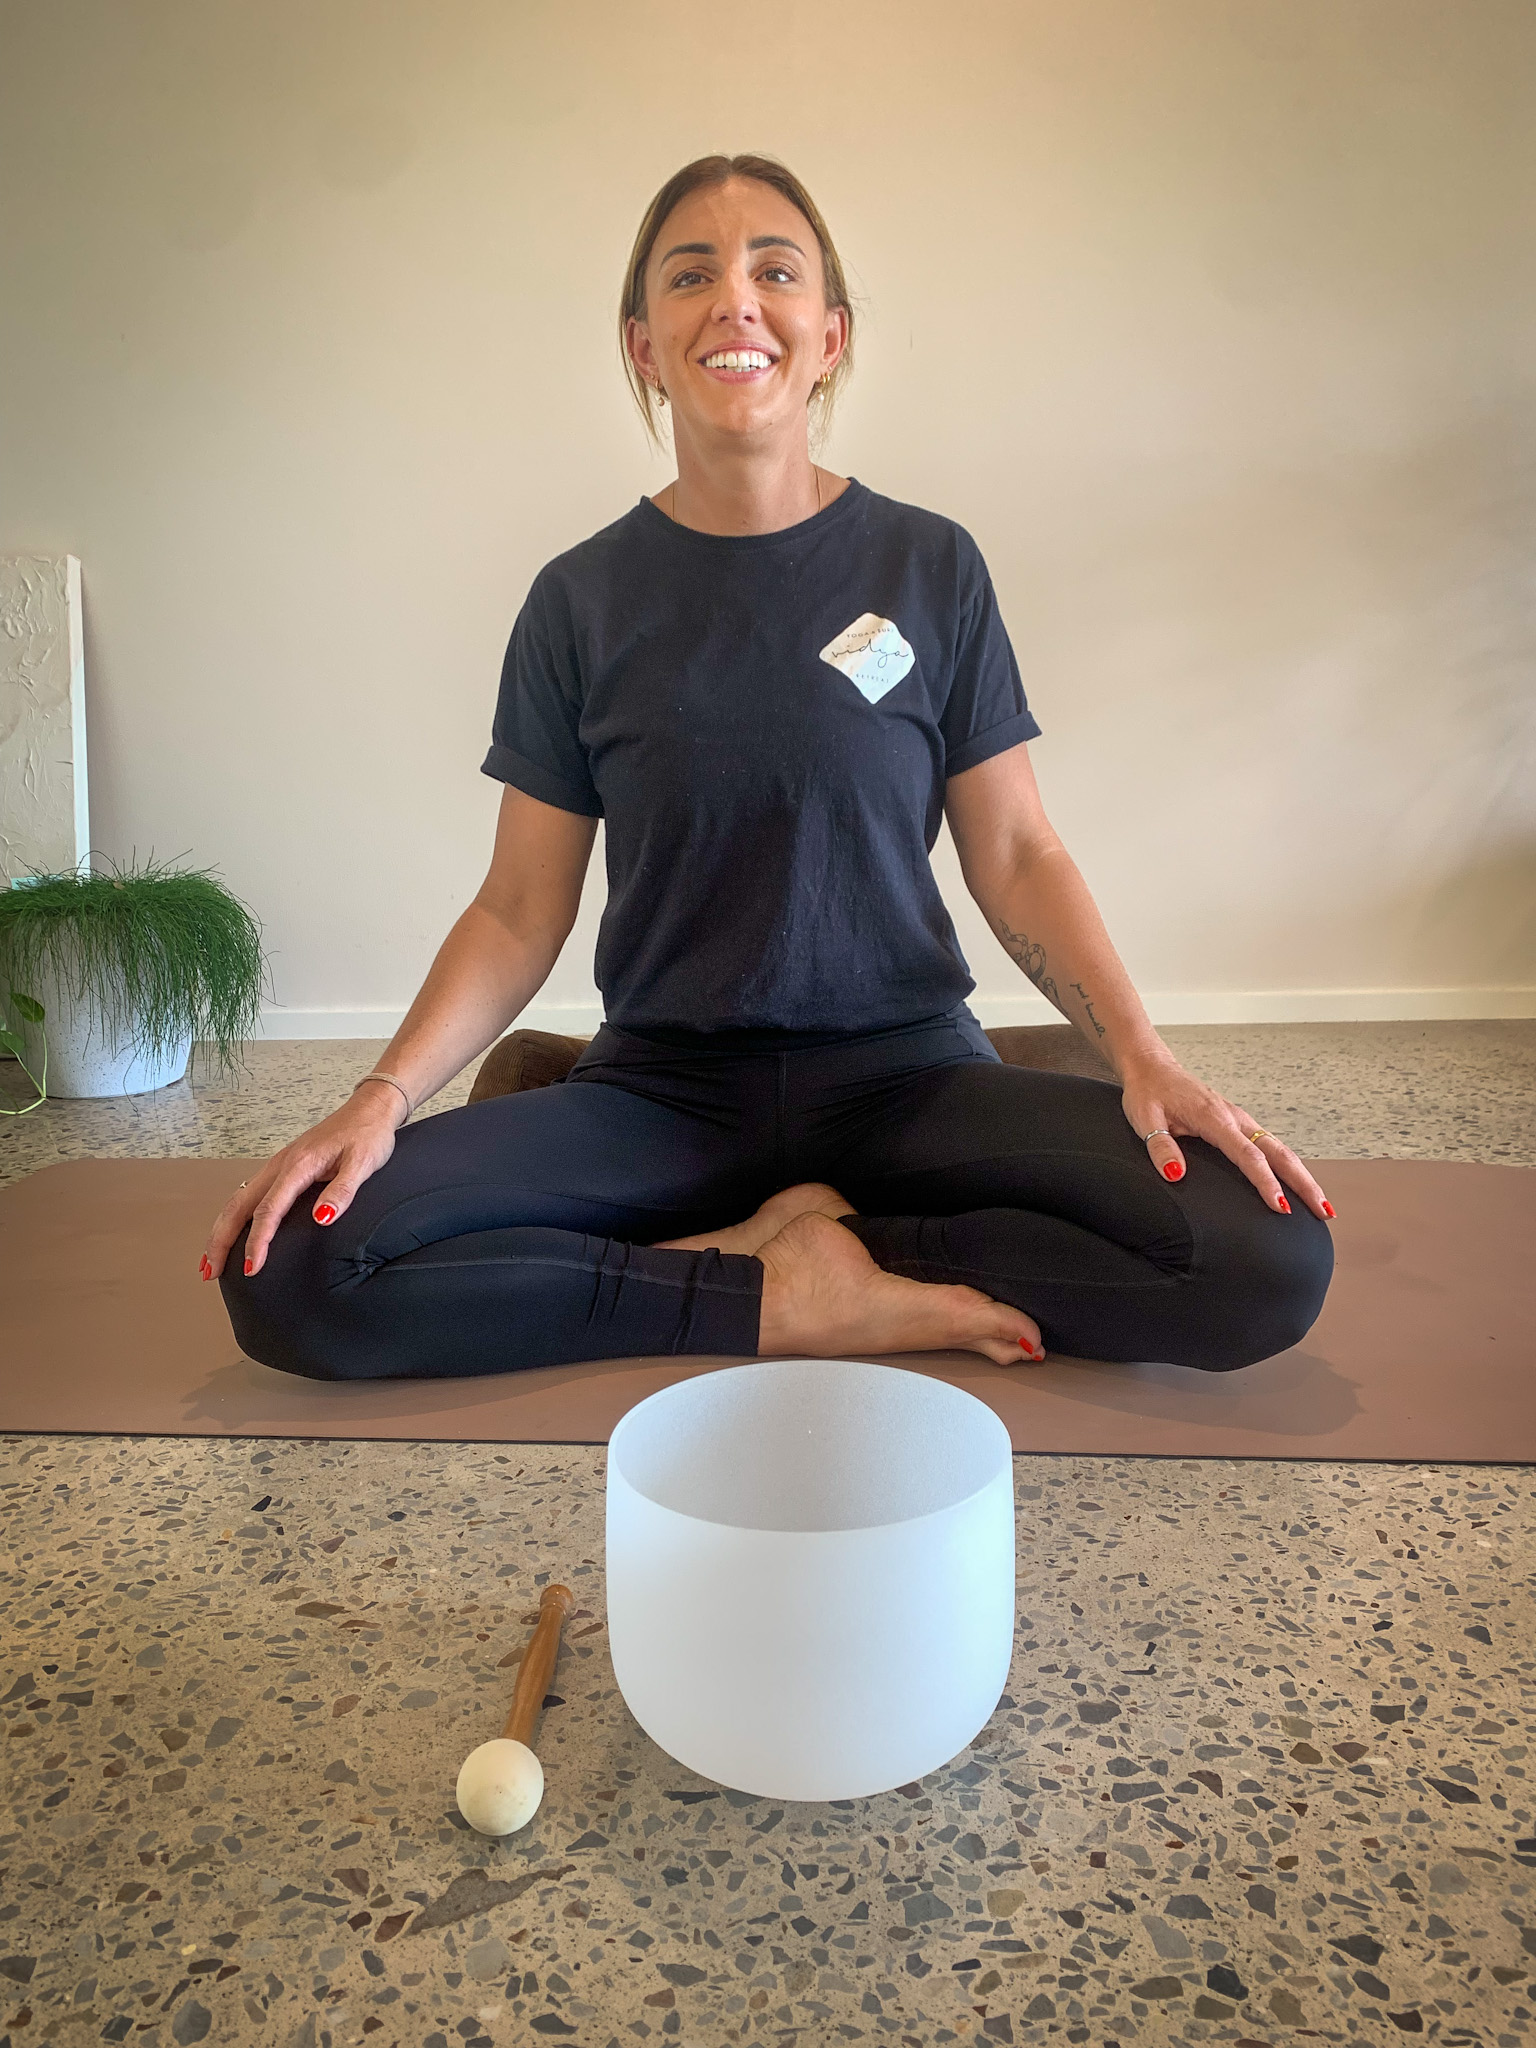 A blond woman sits on a yoga mat in a yoga pose. She has a drum in front of her